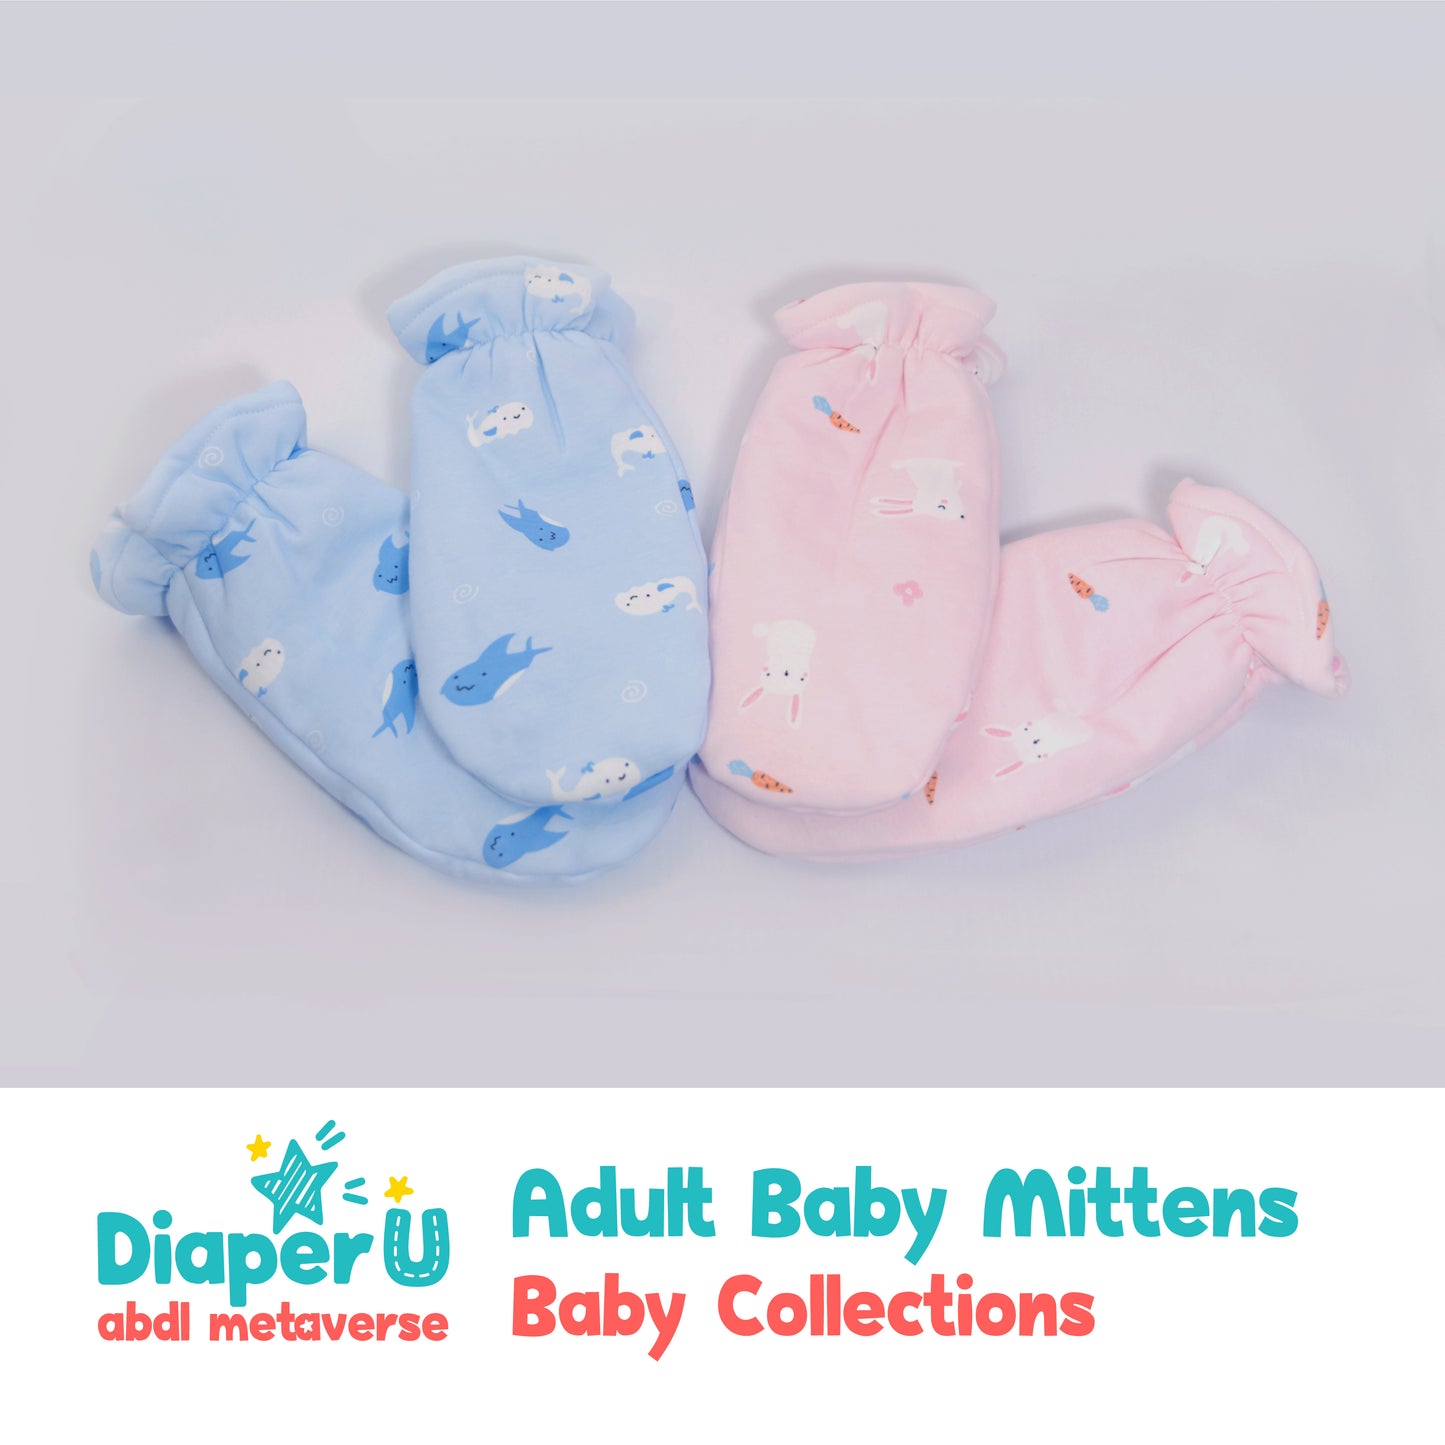 Adult Baby Mittens - Shark & Whale